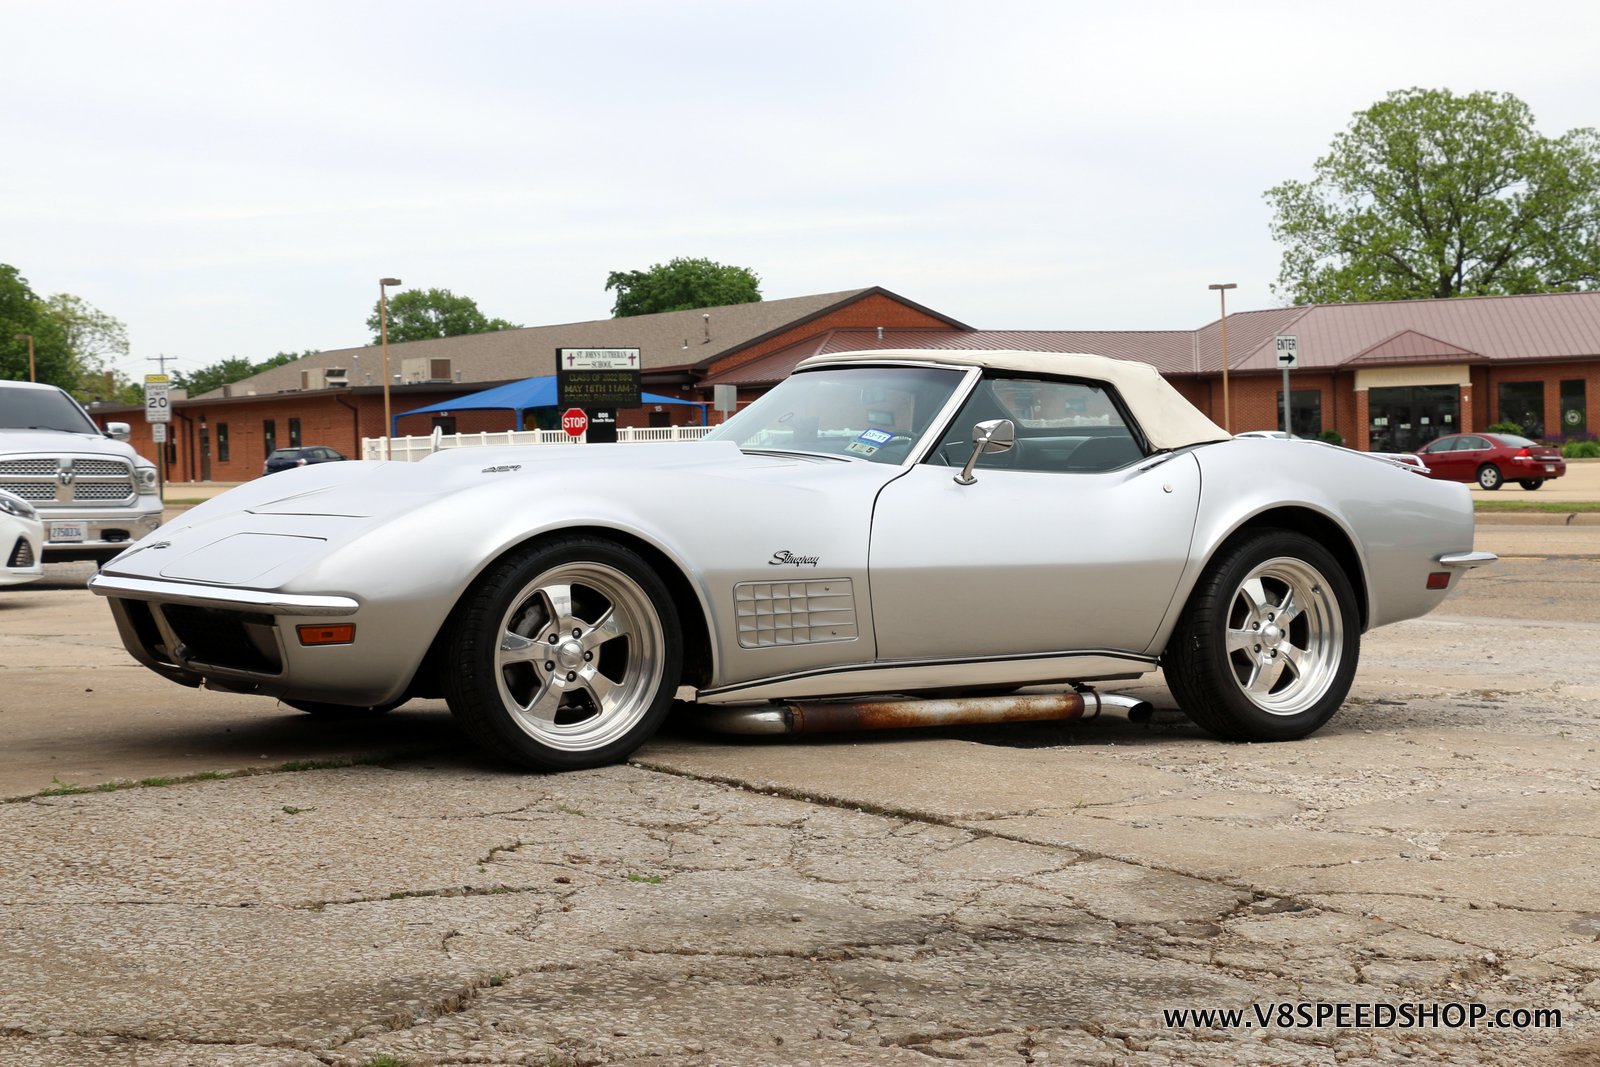 1971 Chevrolet Corvette Roadster Upgrades at the V8 Speed and Resto Shop